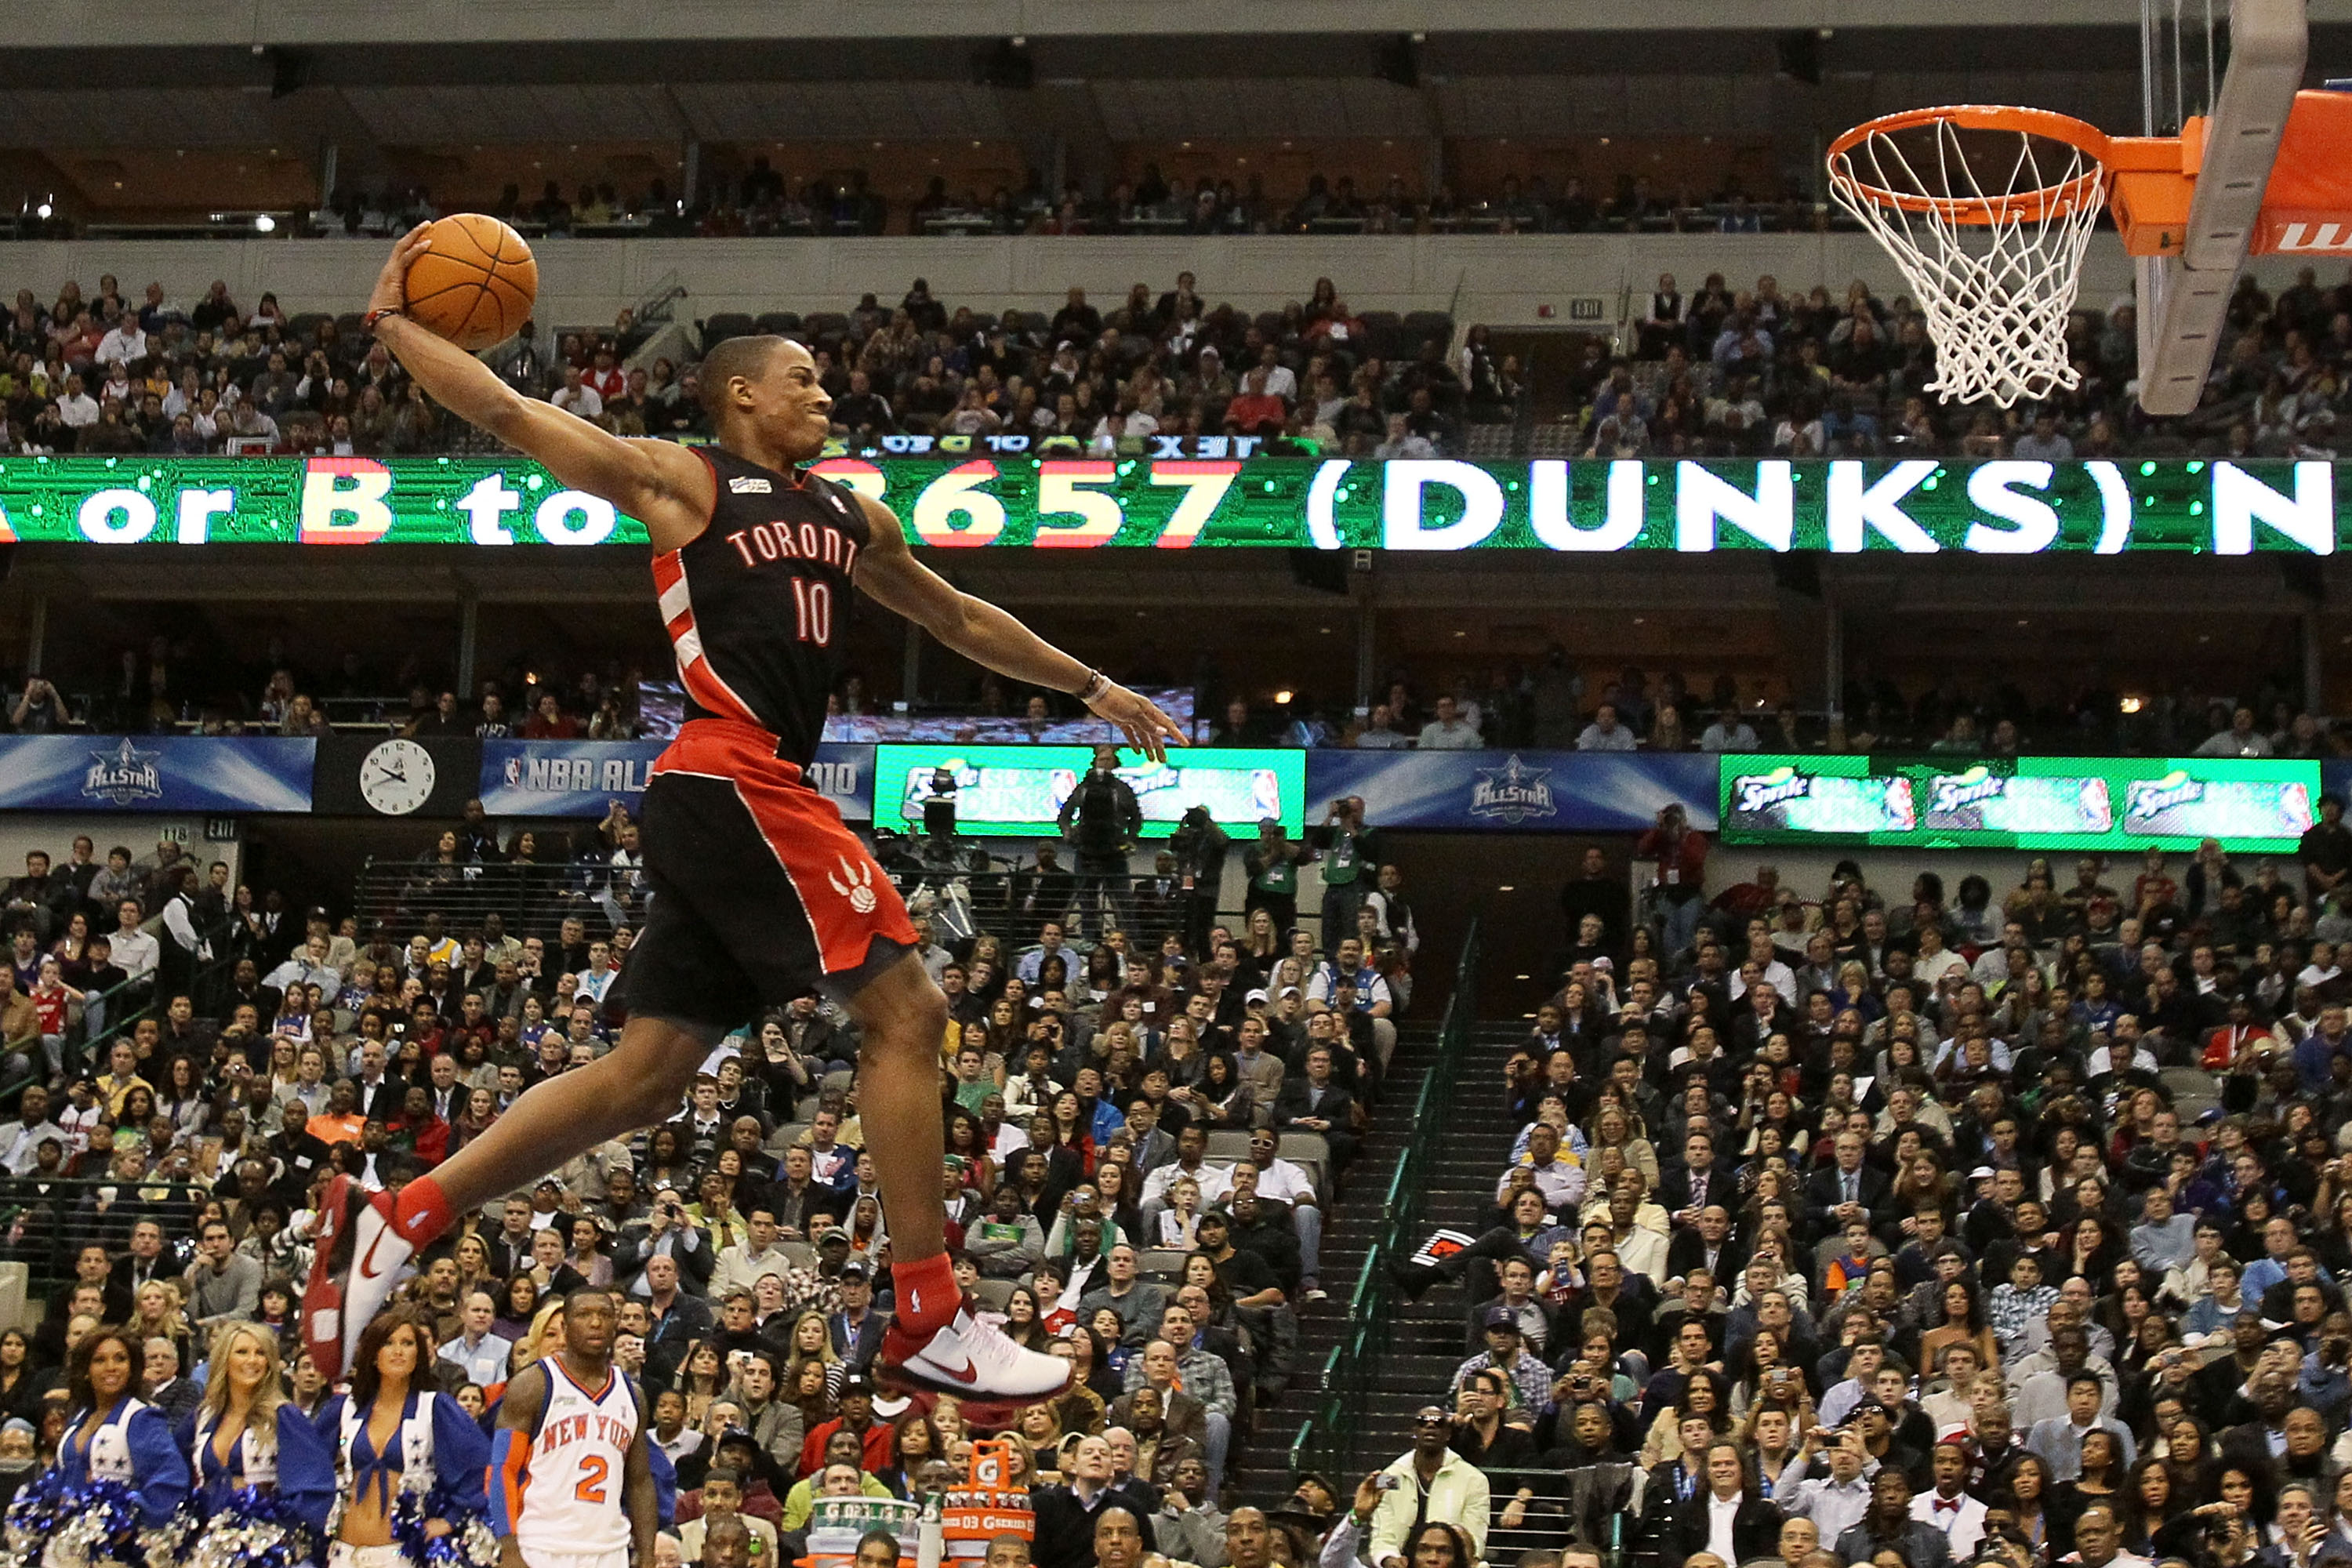 DALLAS - FEBRUARY 13:  DeMar DeRozan #10 of the Toronto Raptors goes up for a dunk during the Sprite Slam Dunk Contest on All-Star Saturday Night, part of 2010 NBA All-Star Weekend at American Airlines Center on February 13, 2010 in Dallas, Texas. NOTE TO